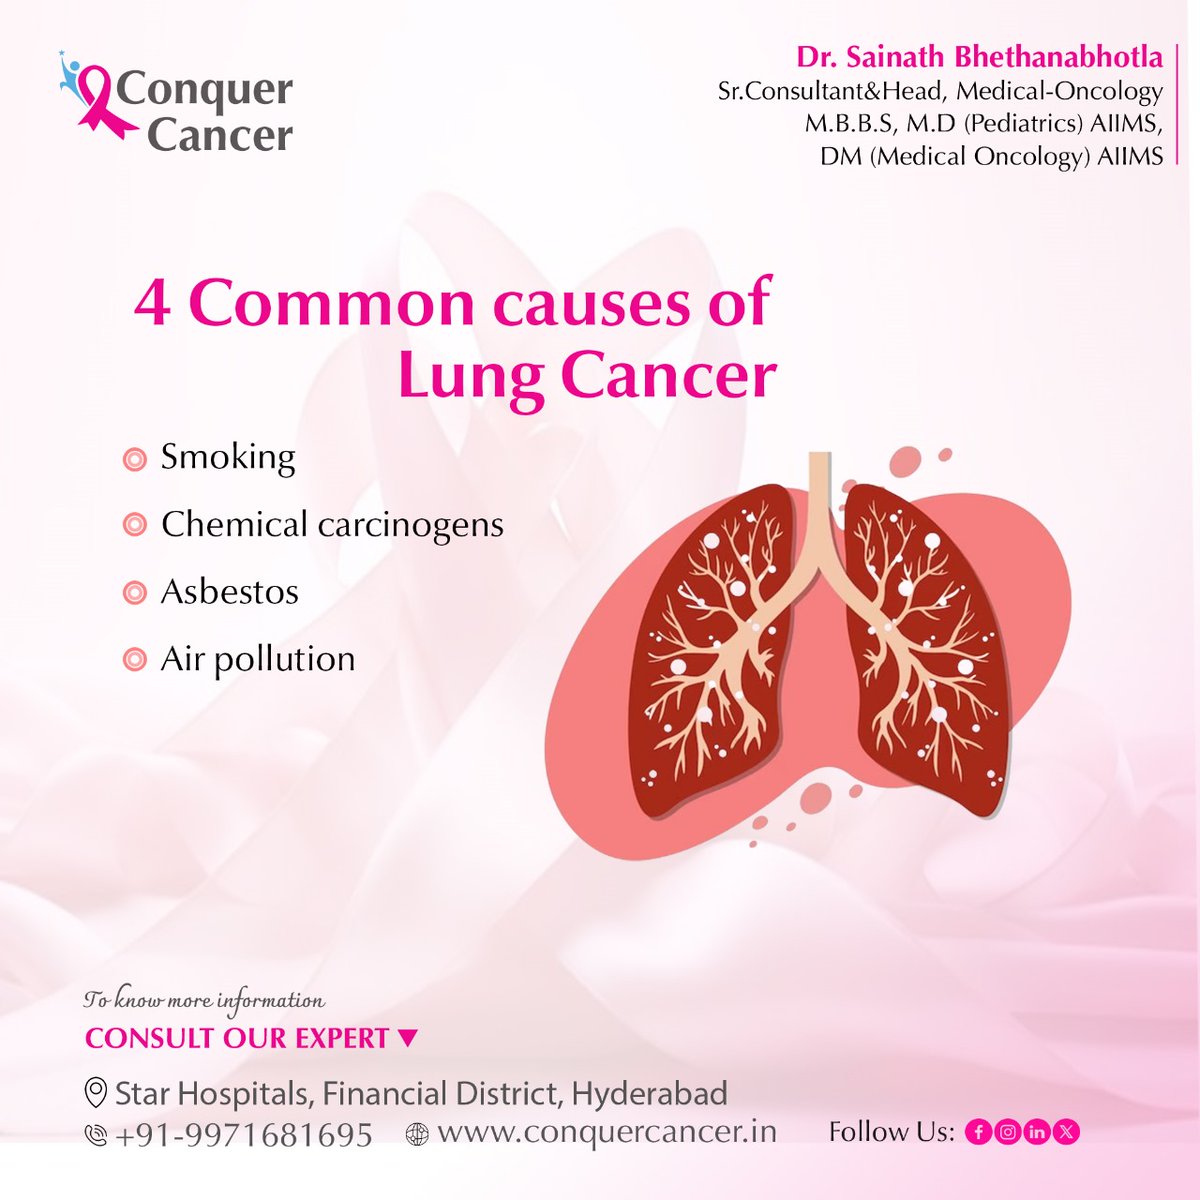 🚭Ignite change by snuffing out the causes of lung cancer! From smoking to exposure to chemical carcinogens, asbestos, and air pollution, let's clear the air and conquer cancer together! 💪
#ConquerCancer #CancerPrevention #CancerTreatment #Nanakramguda #financialdistrict